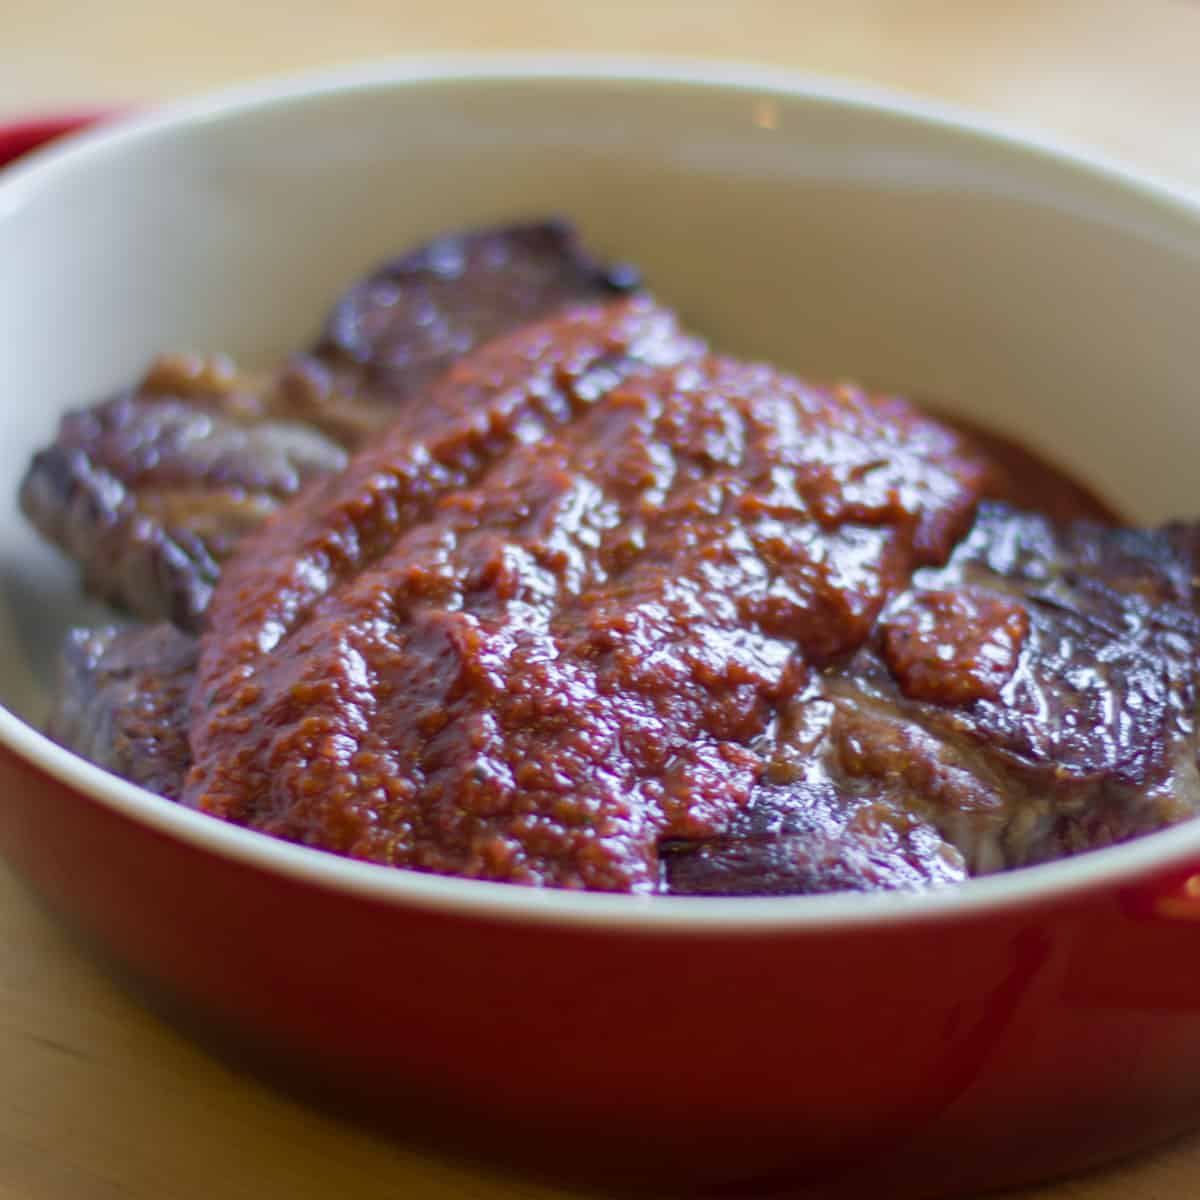 Baking dish with beef and sauce.